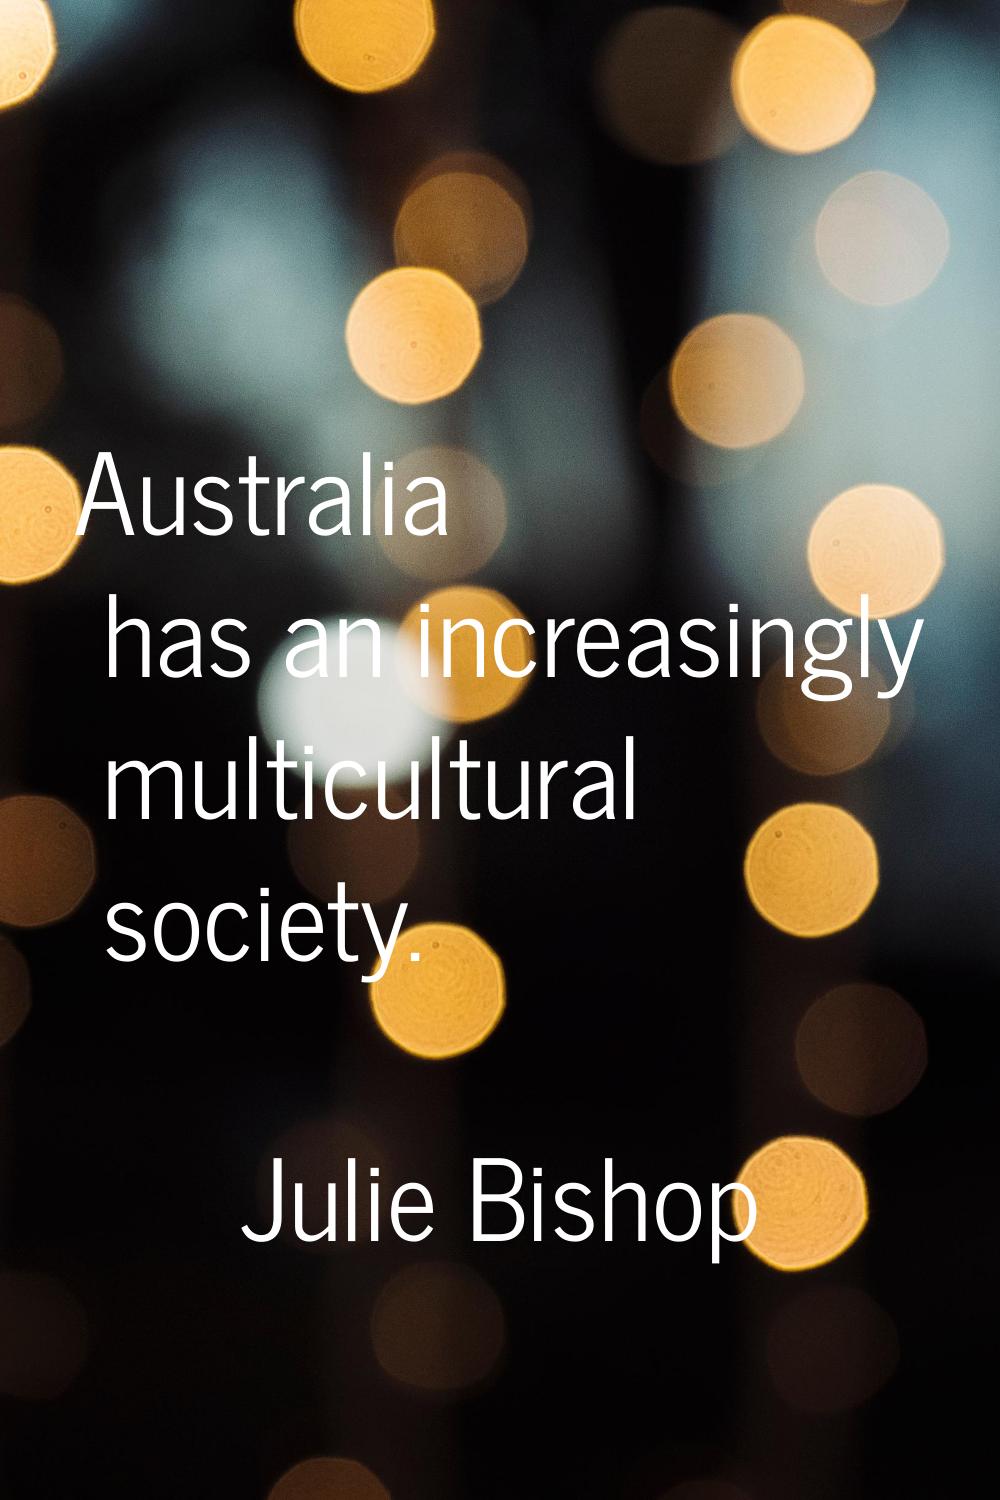 Australia has an increasingly multicultural society.